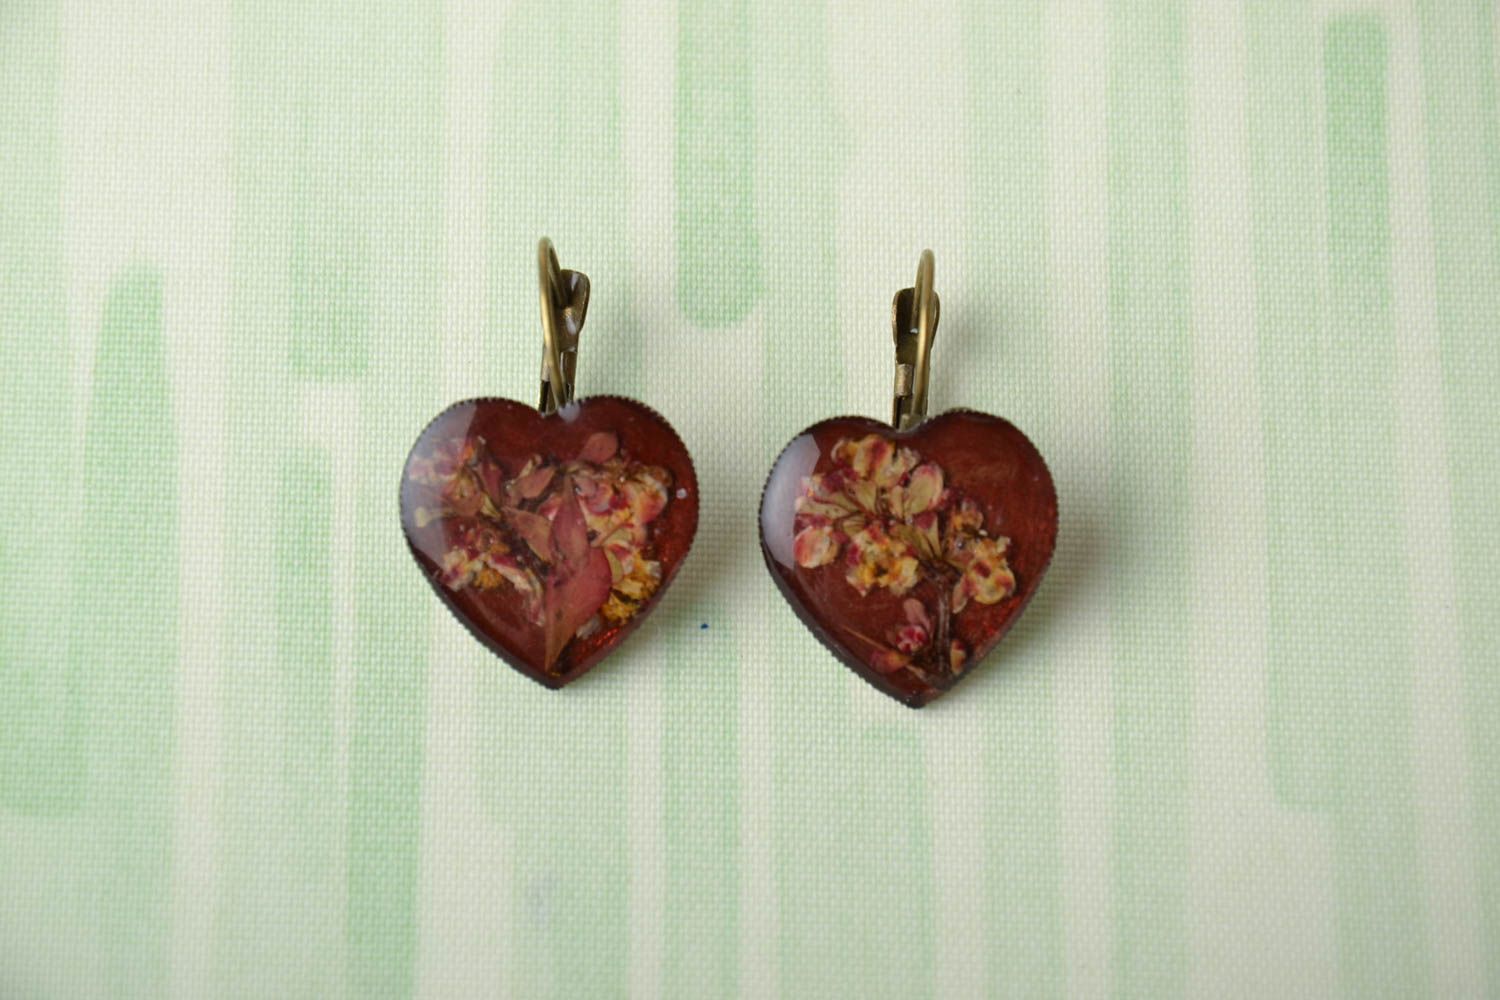 Heart-shaped earrings with natural flowers photo 1